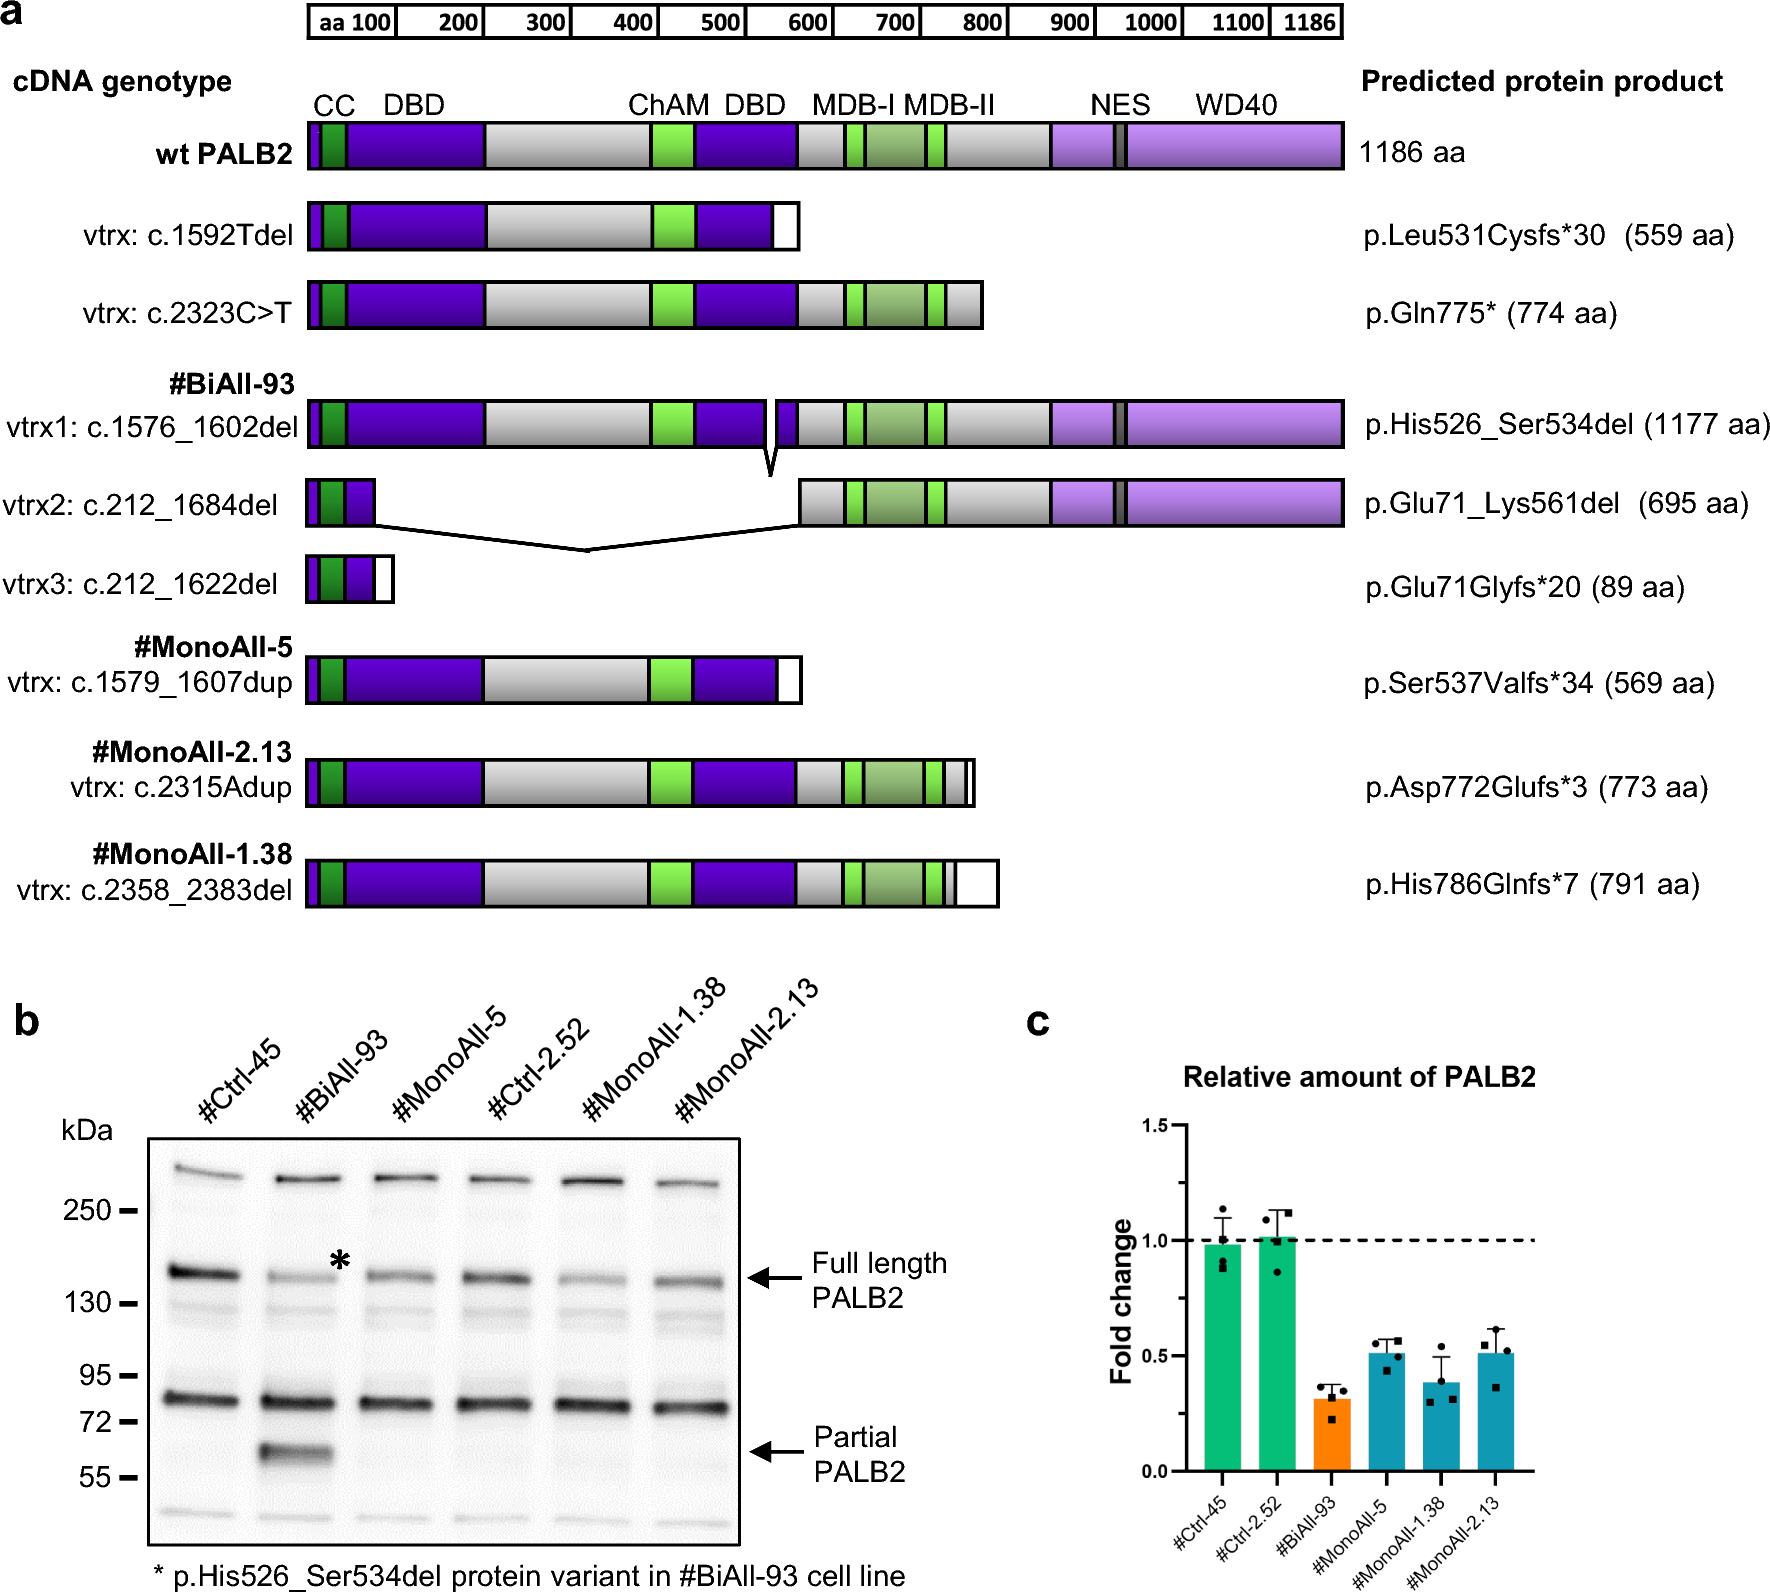 PALB2-mutated human mammary cells display a broad spectrum of morphological and functional abnormalities induced by increased TGFβ signaling